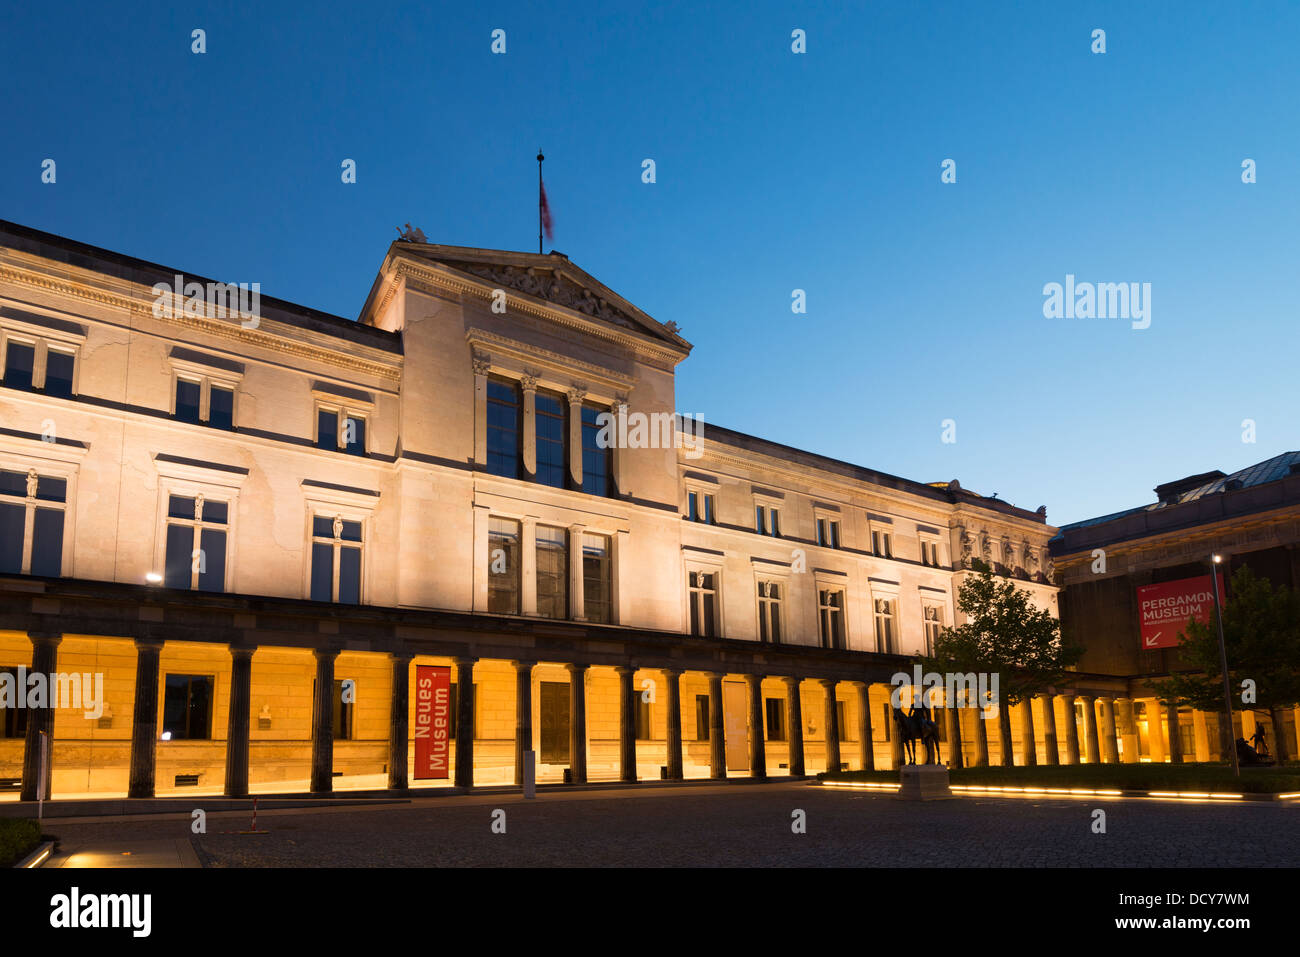 Exterior night view of Neues Museum or New Museum on Museumsinsel in Berlin Germany Stock Photo